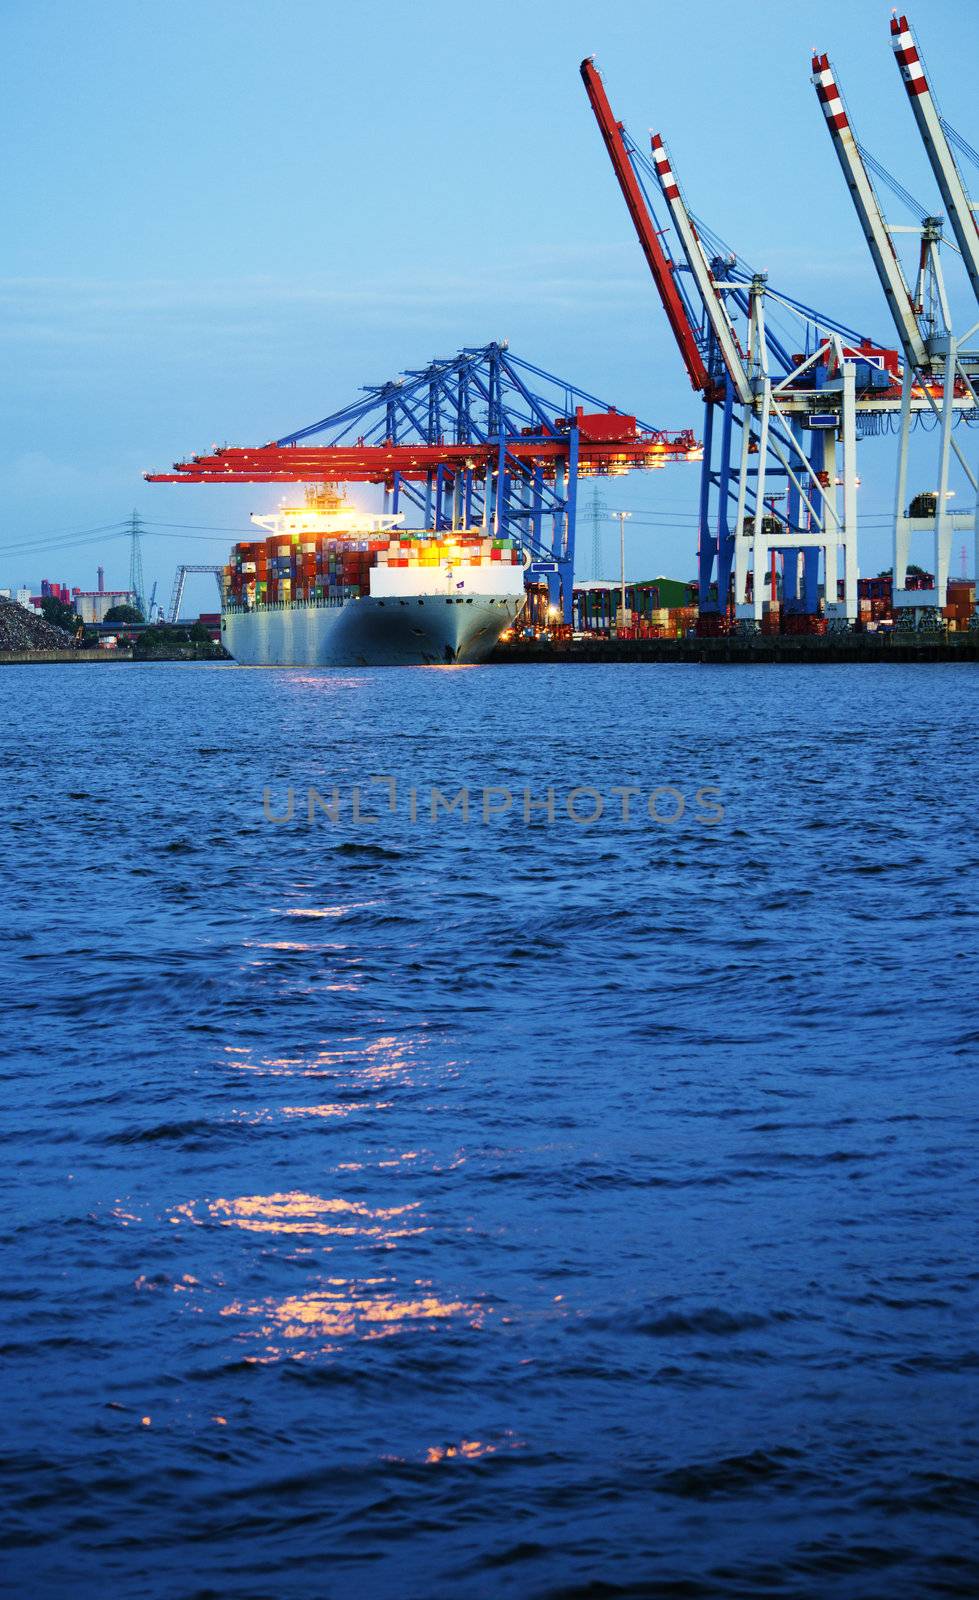 Image of container ship in the process of unloading in the harbor of Hamburg, Germany.